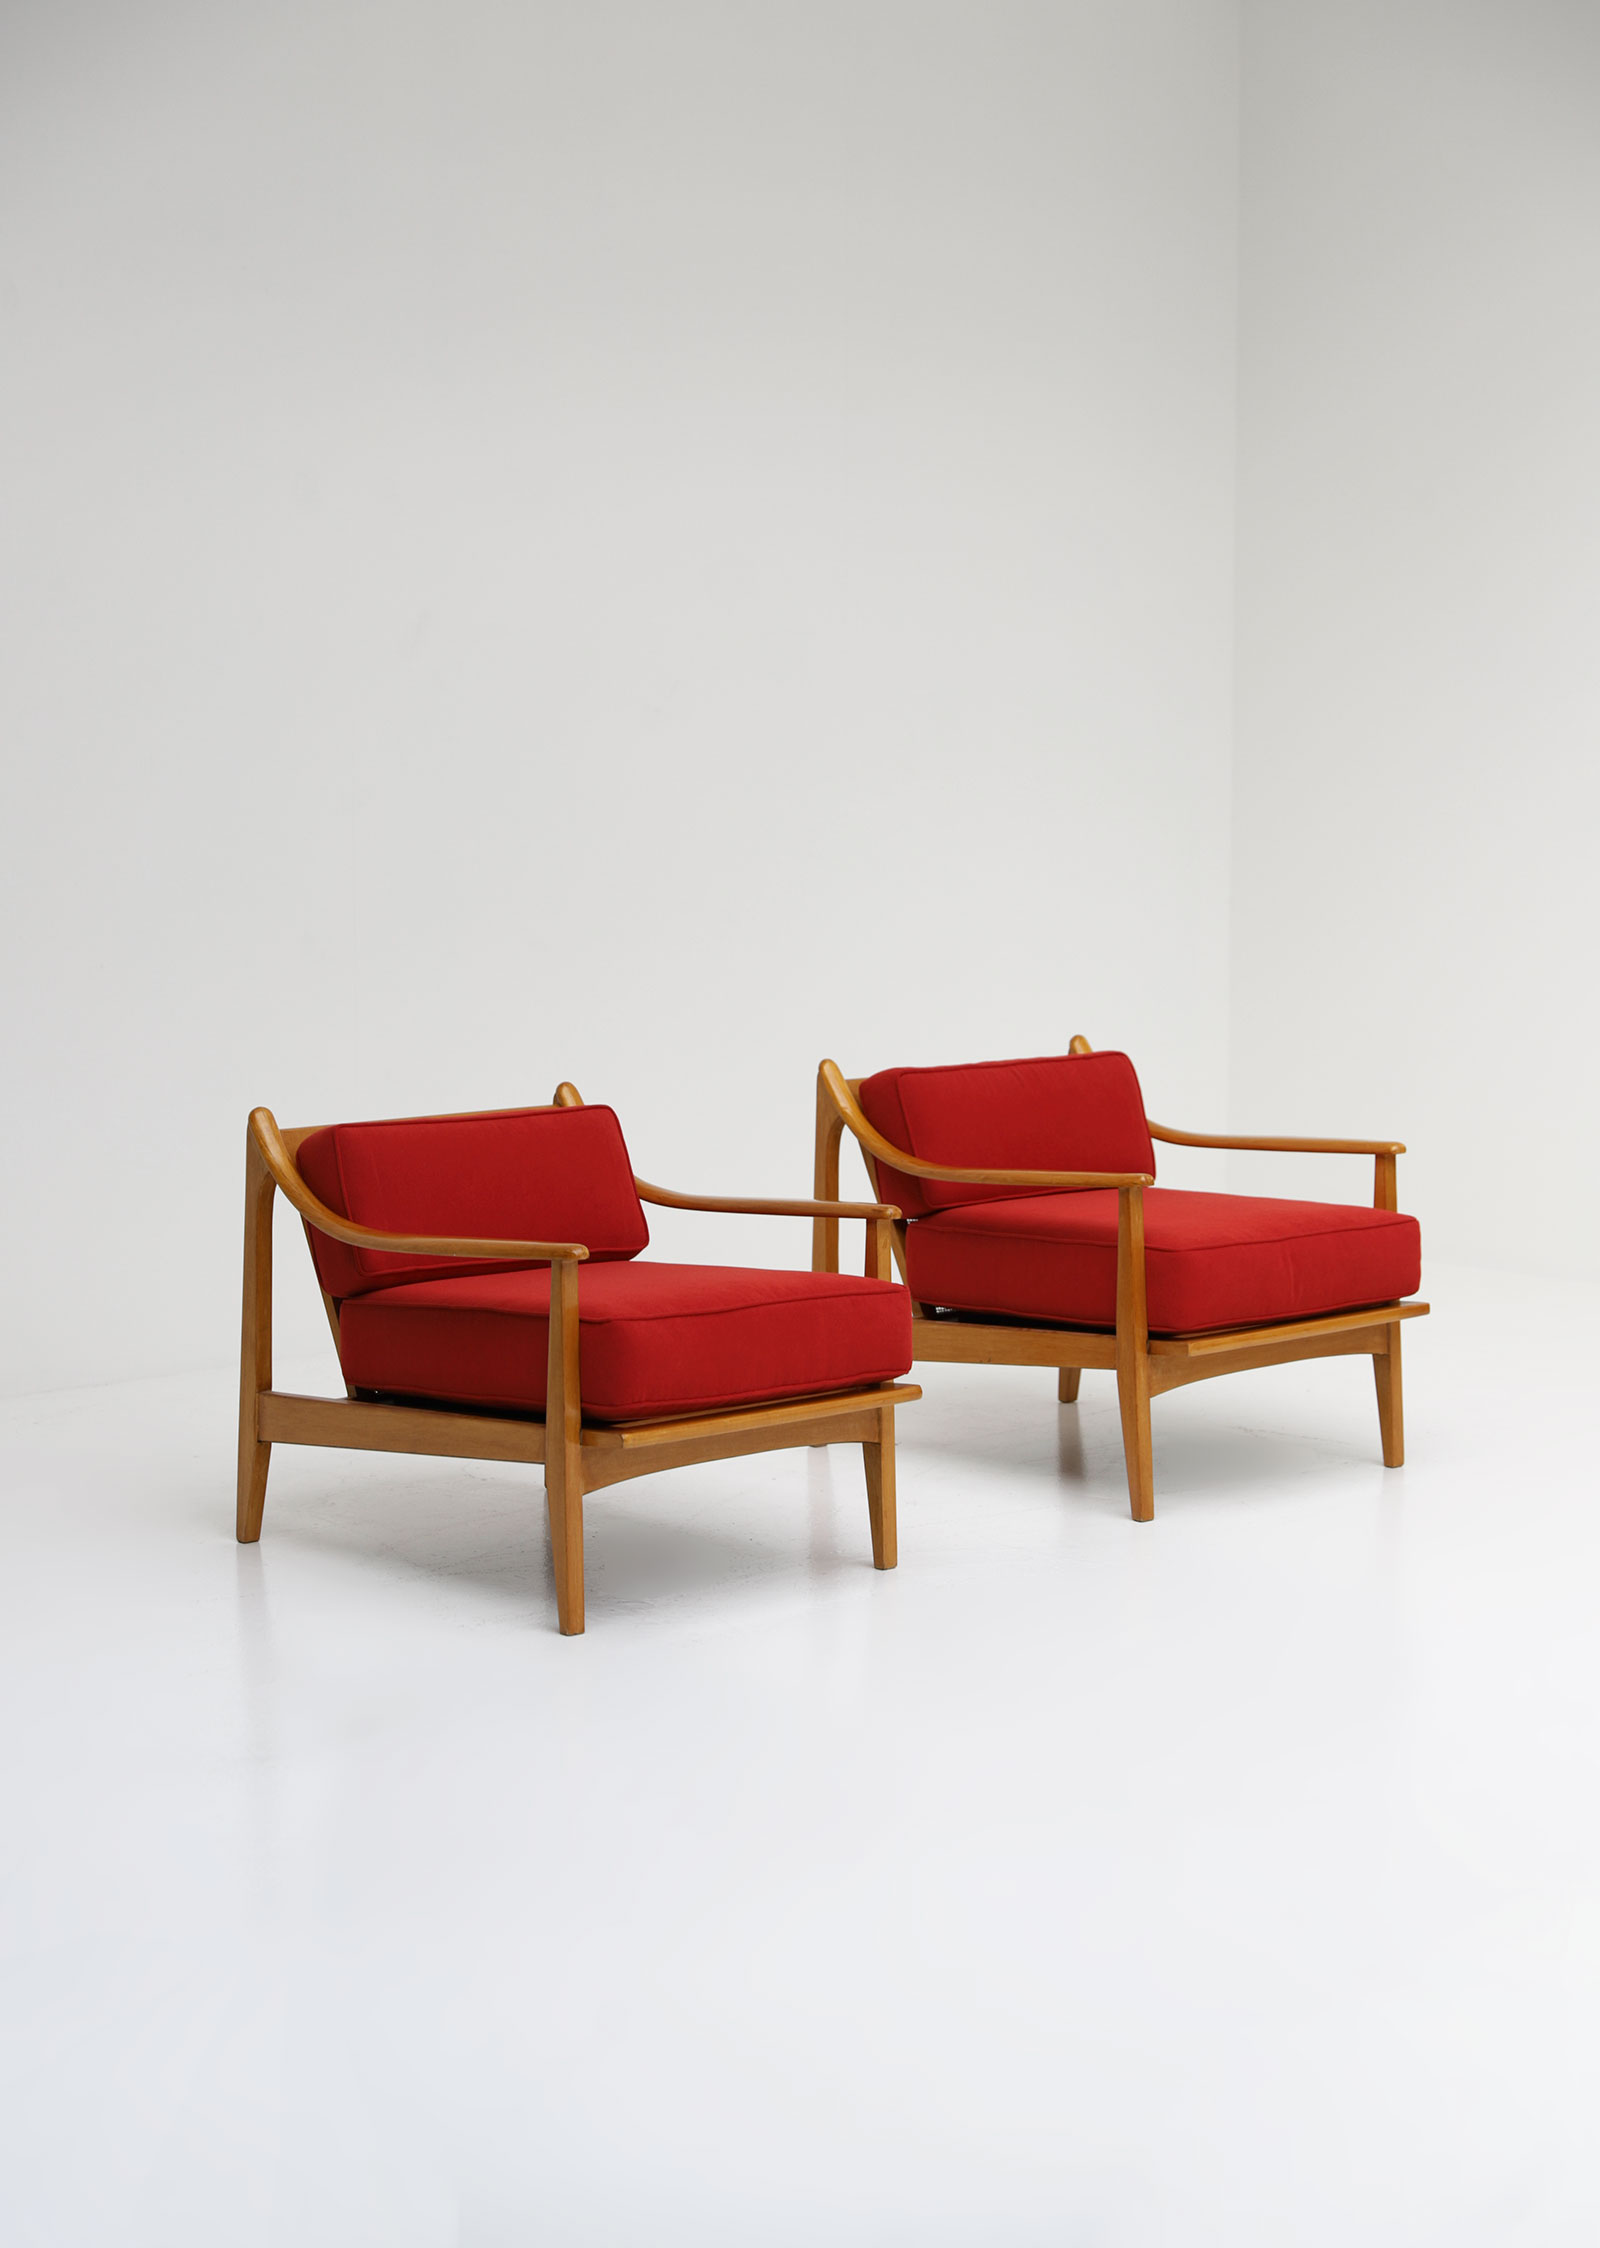 1960s 2 easy chairs Unknownimage 1